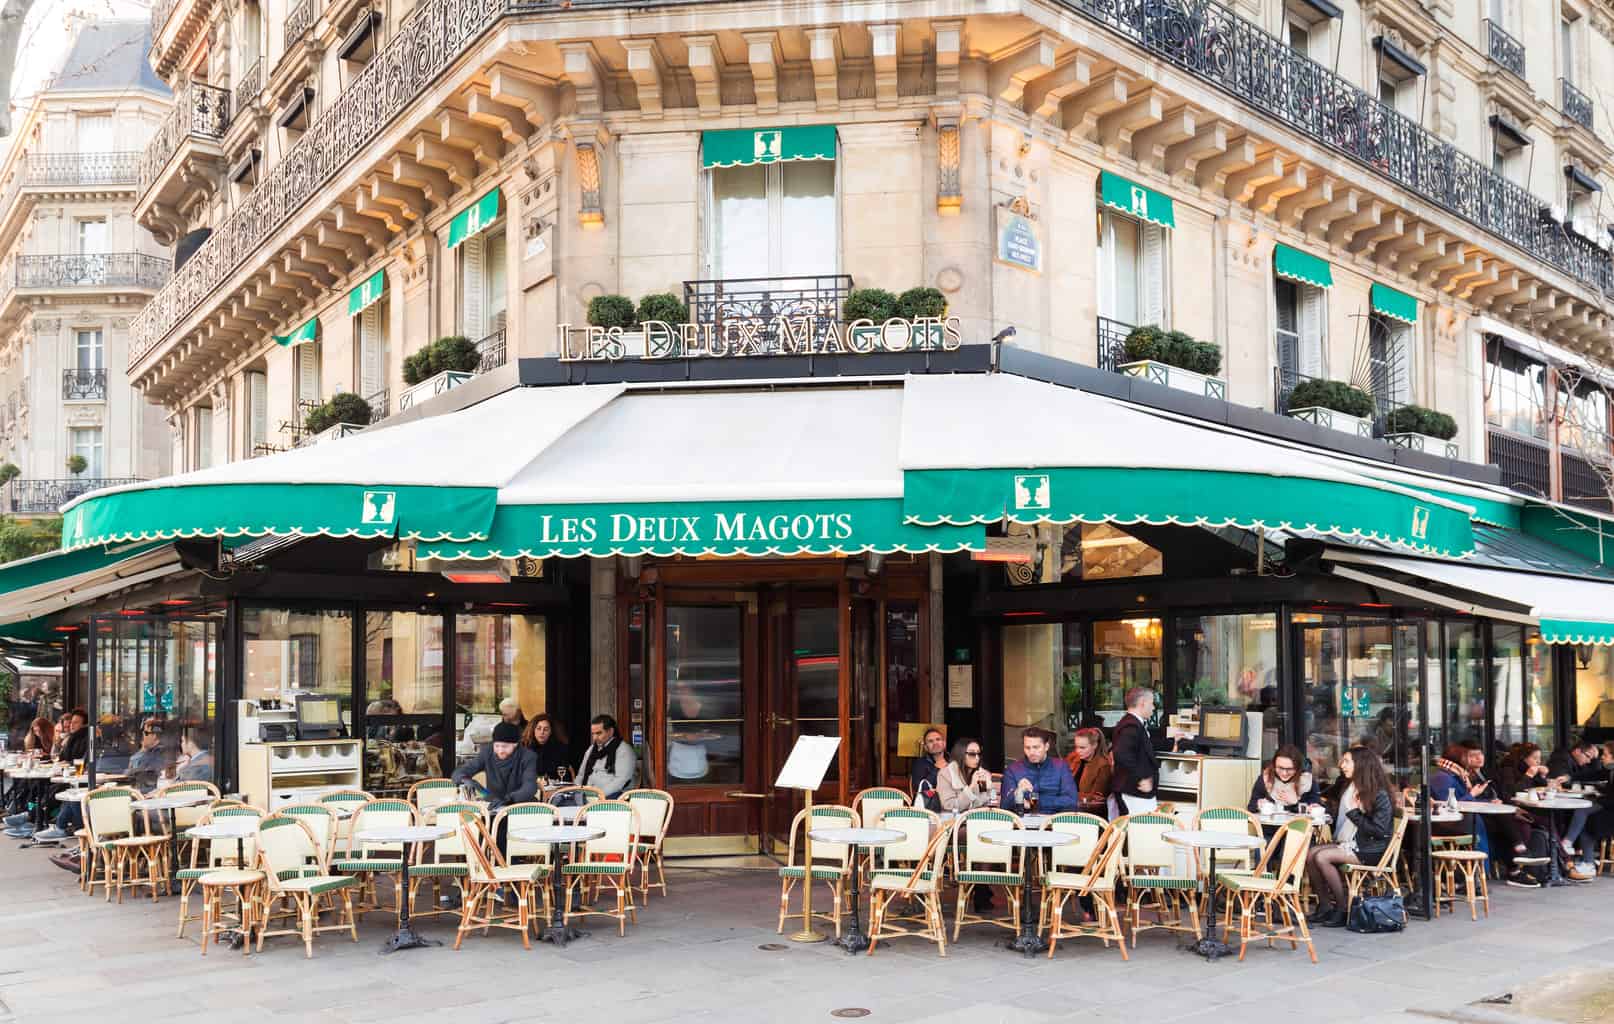 Because of its famous clientele, past and present, Les Deux Magots is one of the most famous cafes in Paris.